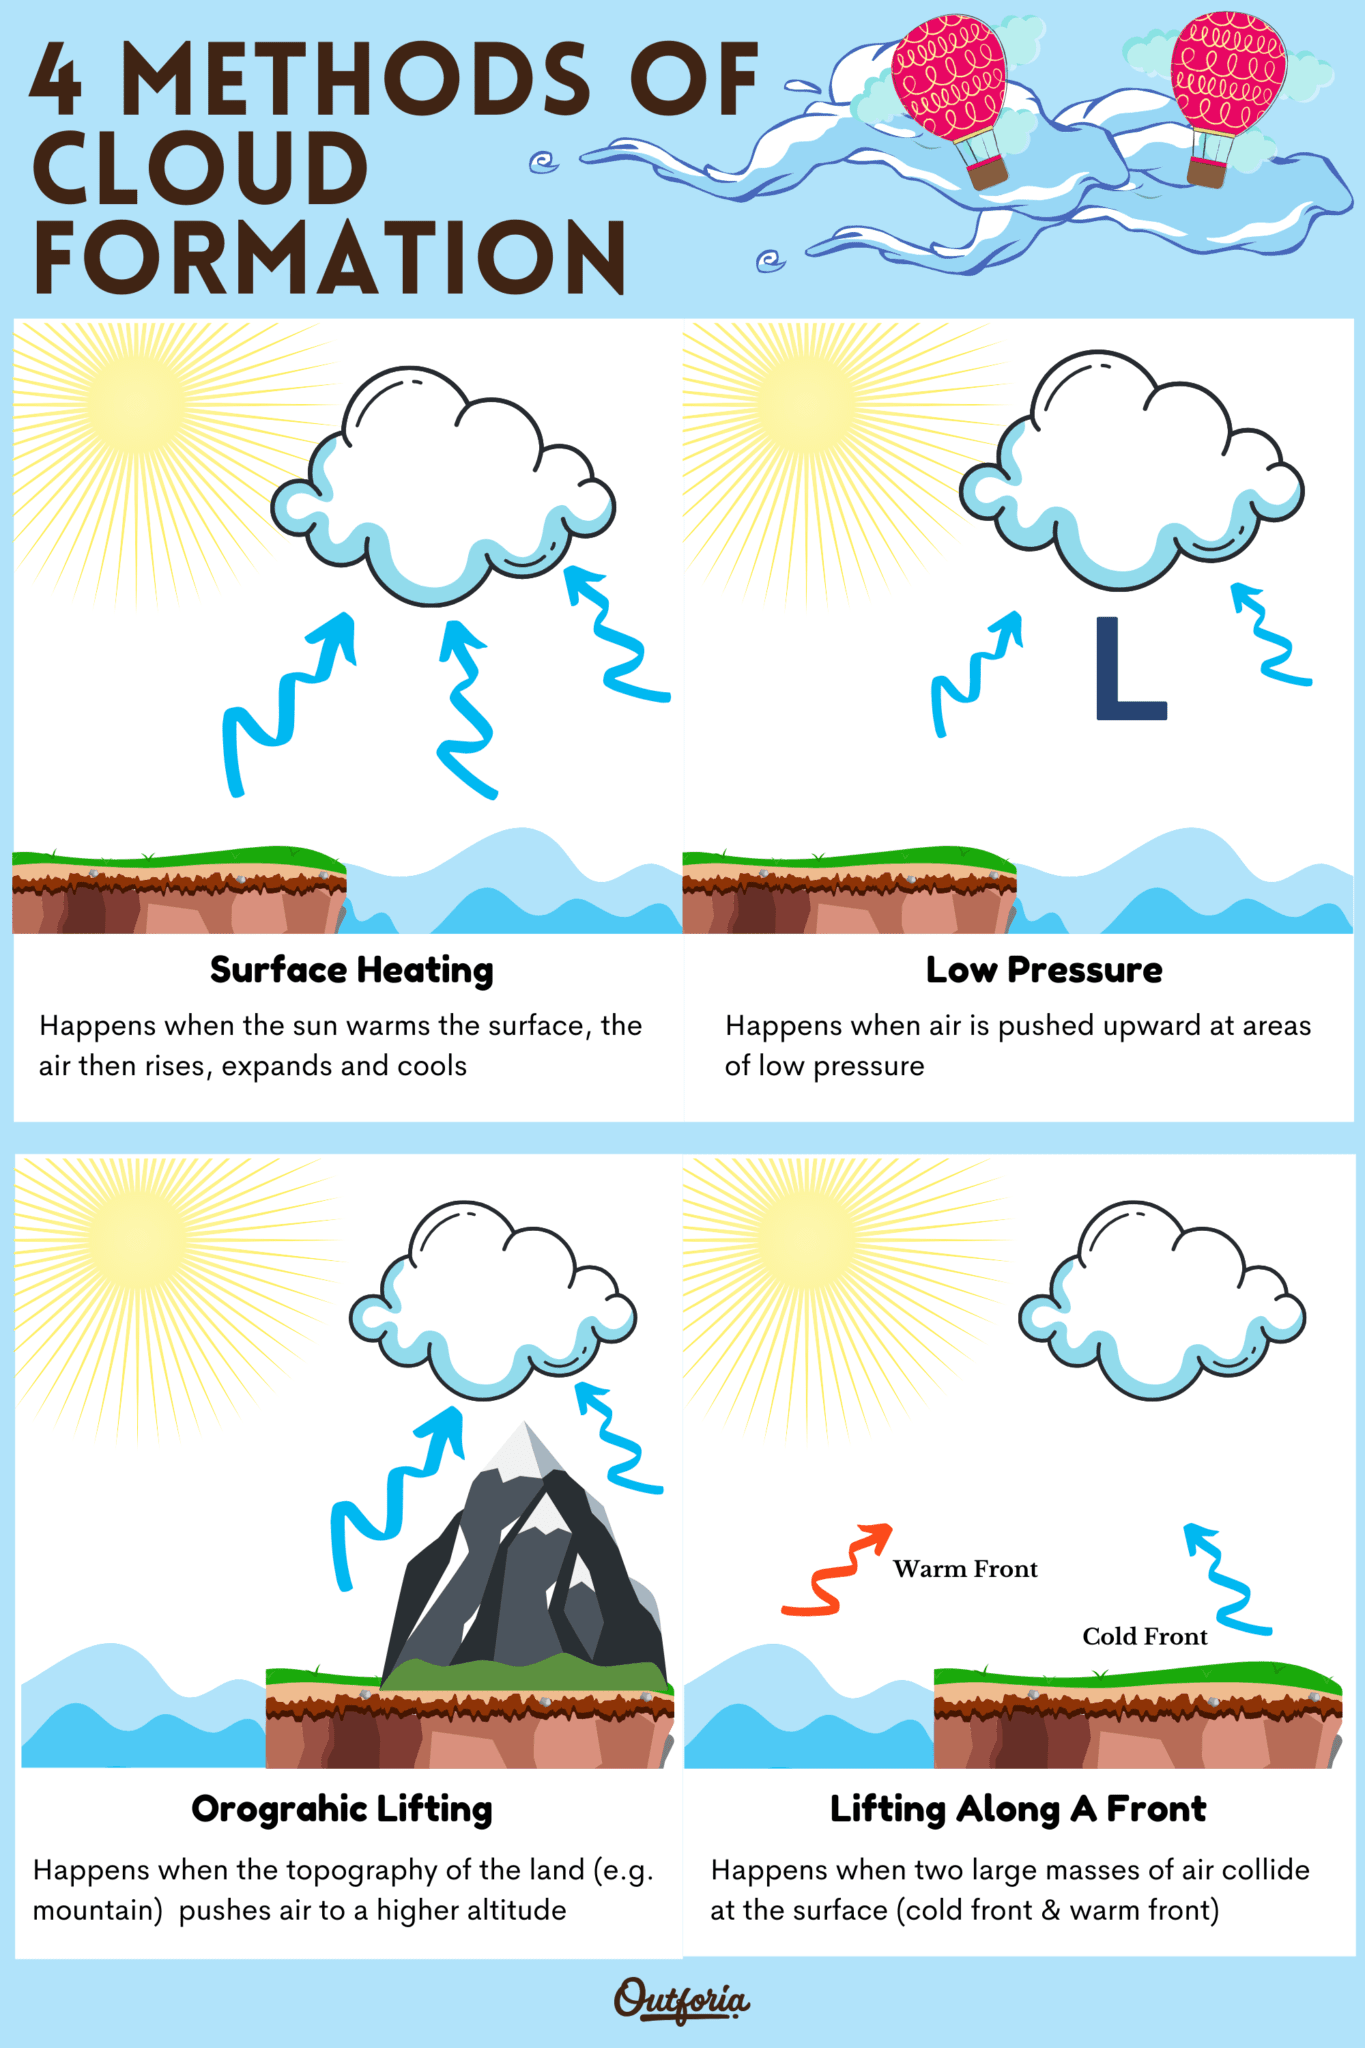 Cloud Formation Infographic 04211 1365x2048 